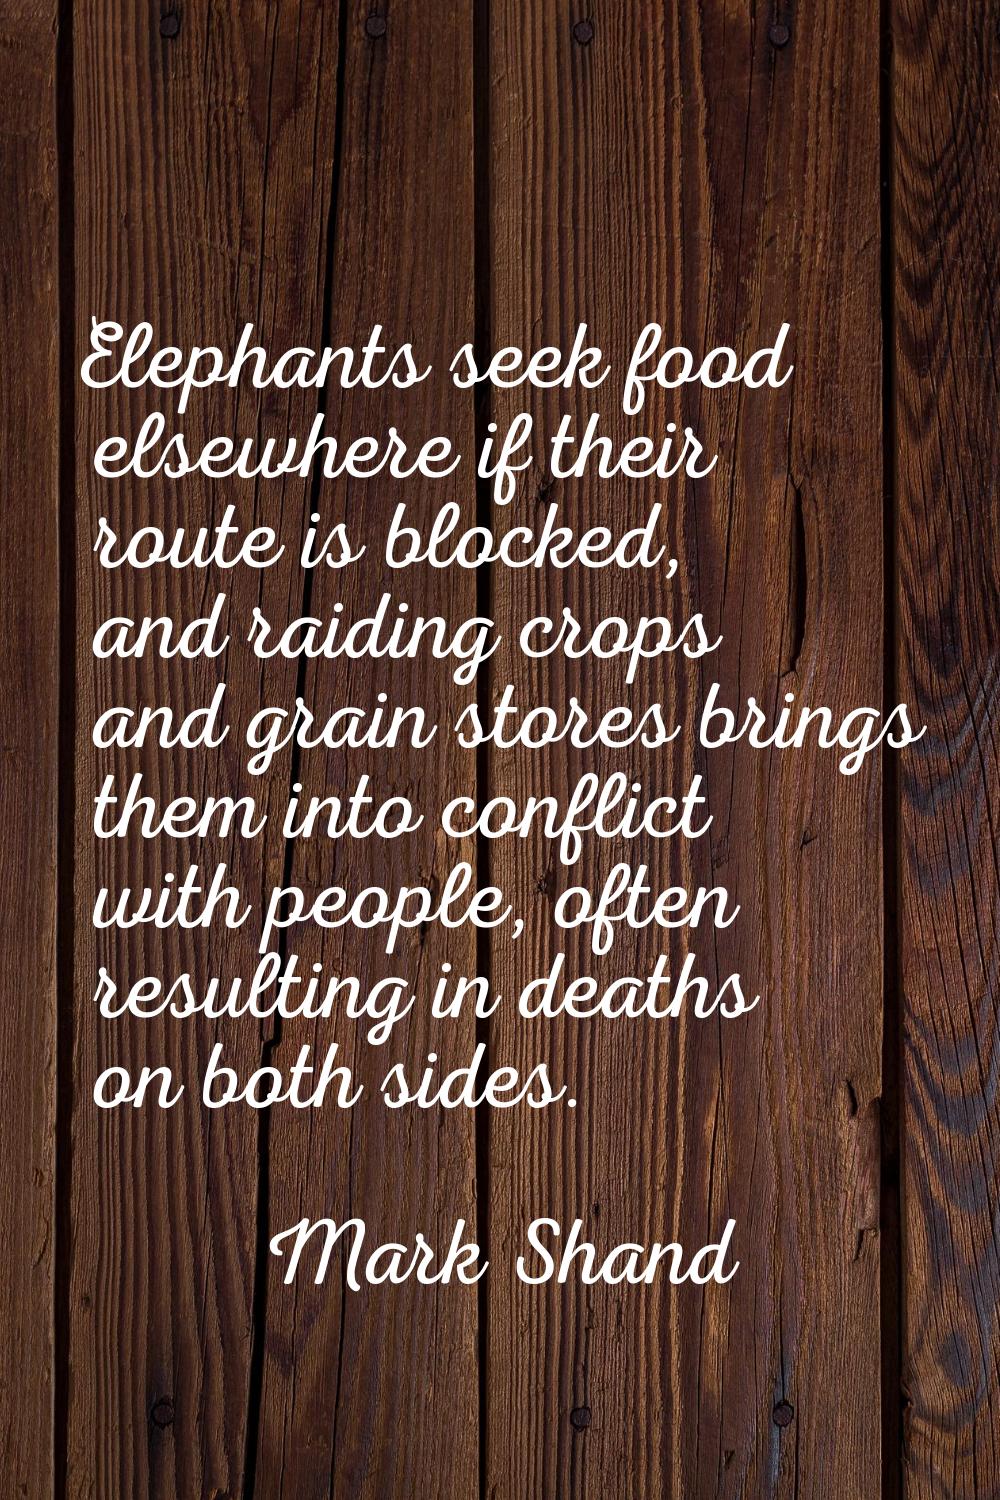 Elephants seek food elsewhere if their route is blocked, and raiding crops and grain stores brings 